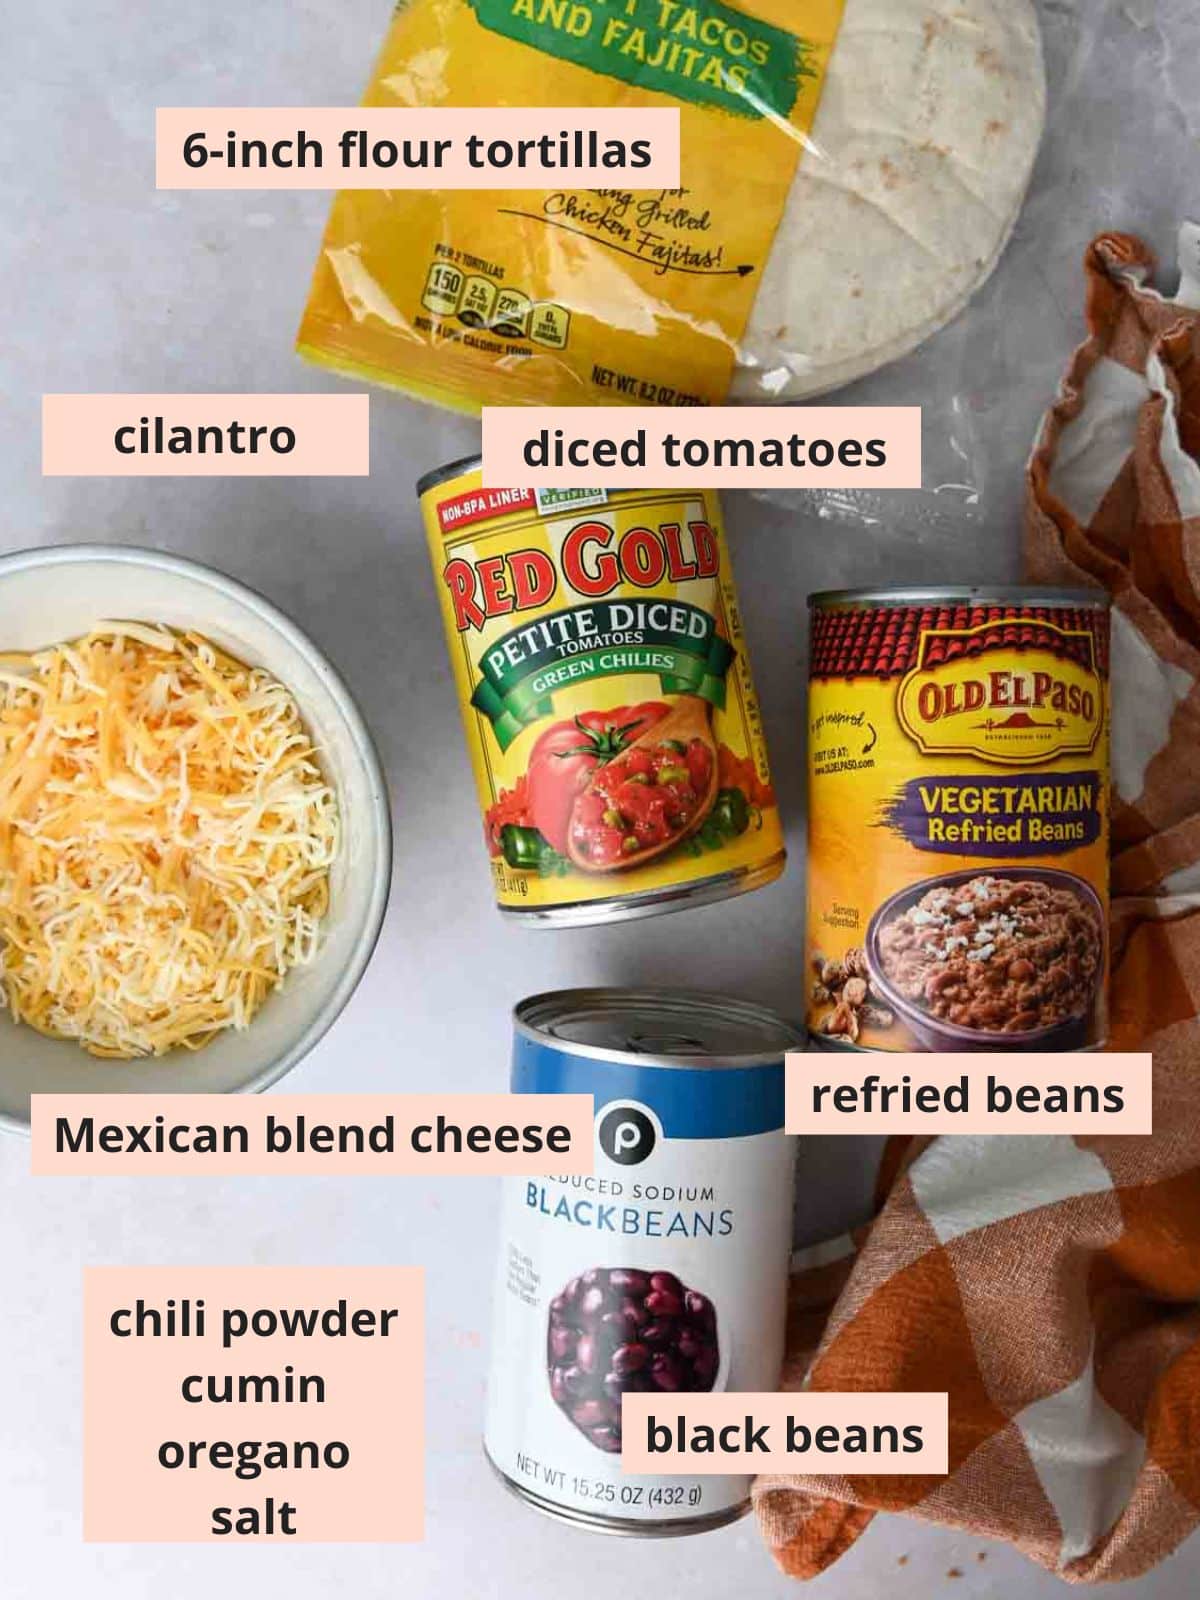 Labeled ingredients used to make baked tacos.